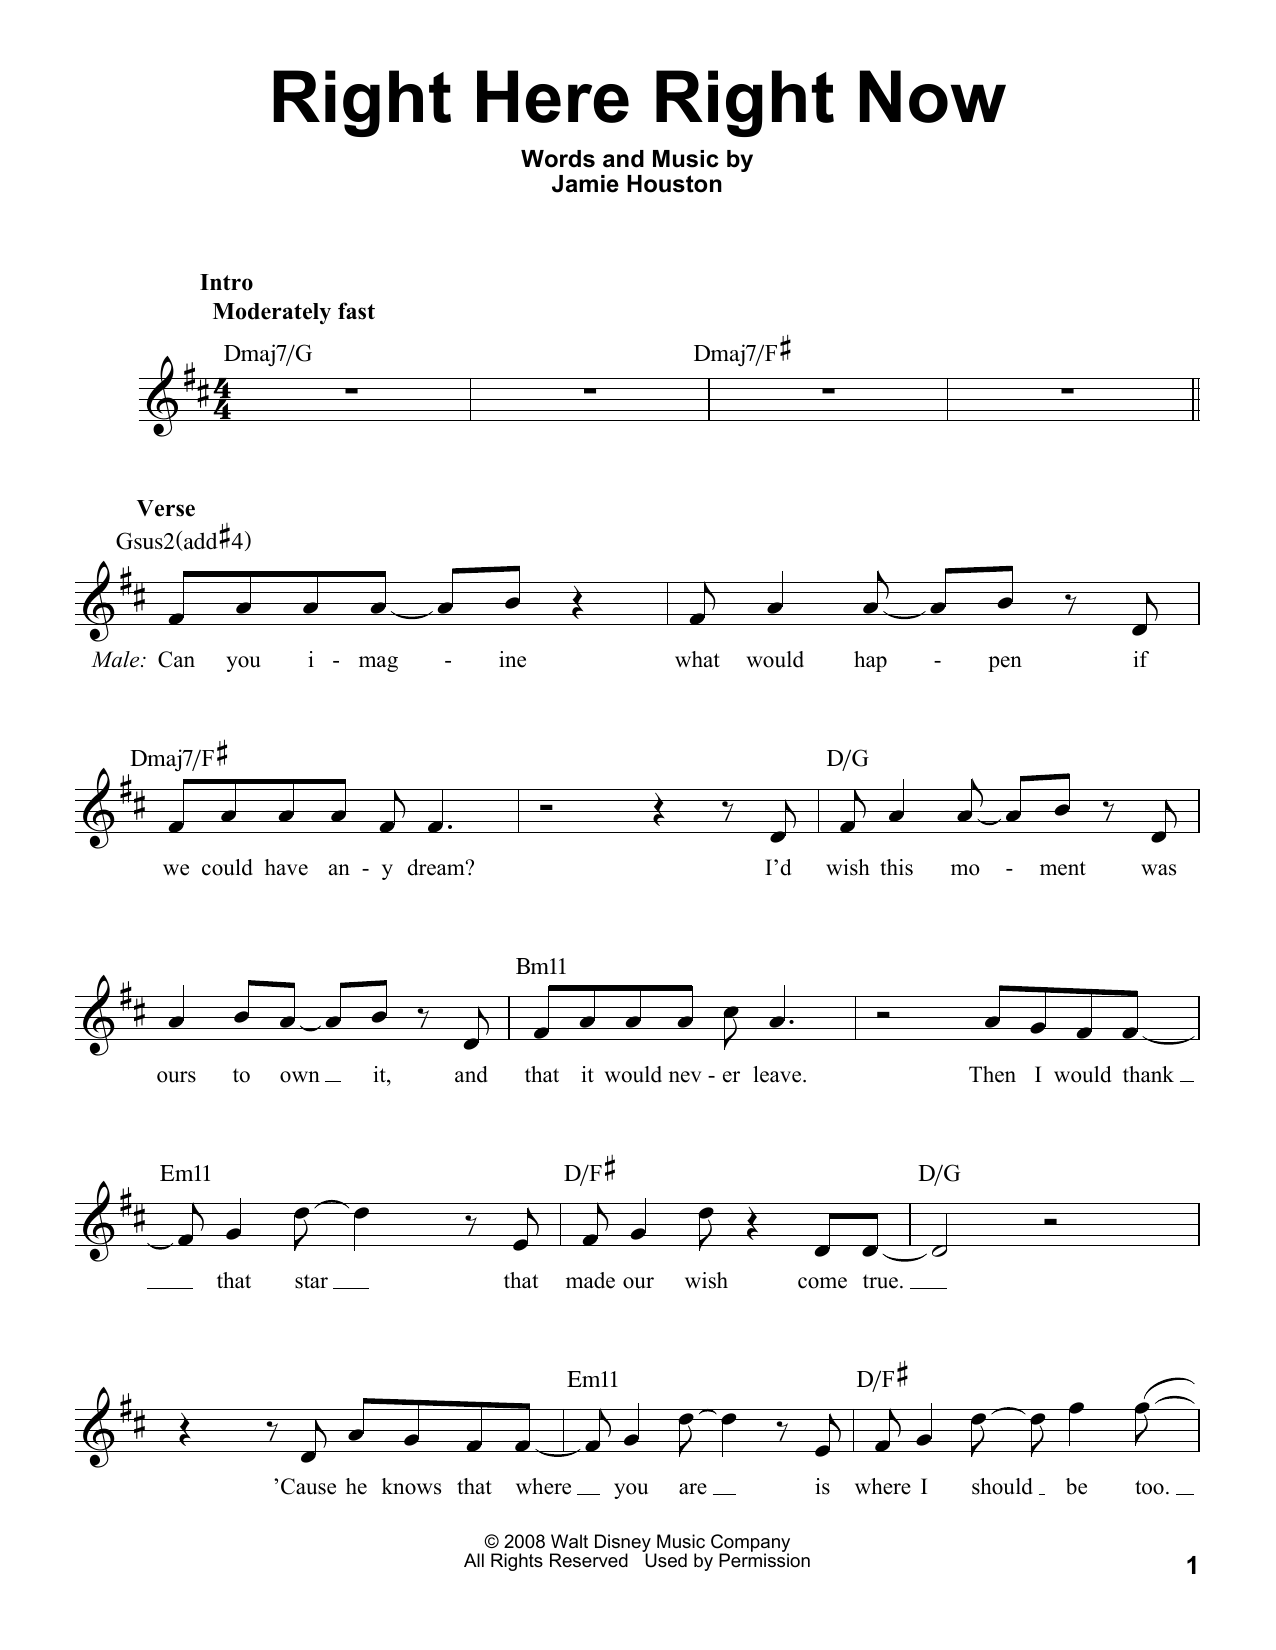 Jamie Houston Right Here Right Now sheet music notes and chords. Download Printable PDF.